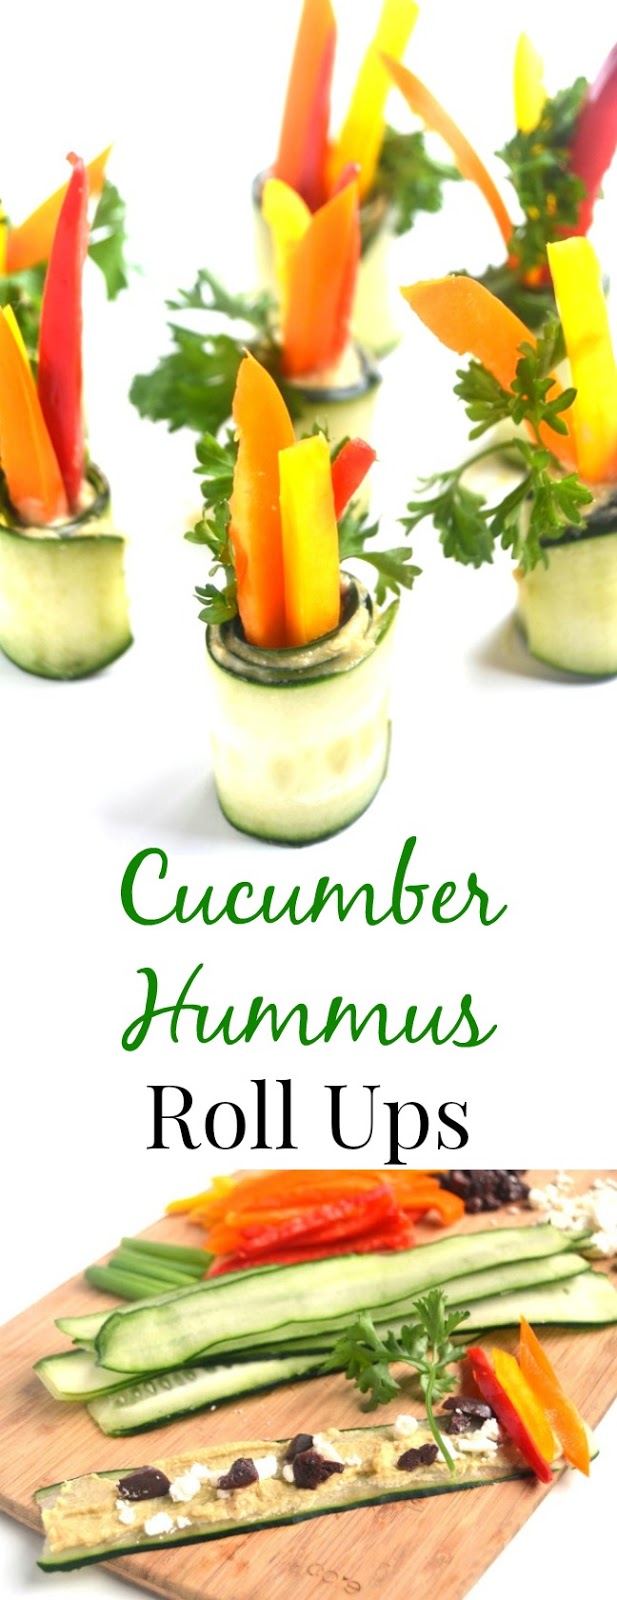 Cucumber Hummus Roll Ups are an easy and healthy appetizer that take 10 minutes to make and are perfect for entertaining! Made with hummus, feta and fresh vegetables. www.nutritionistreviews.com